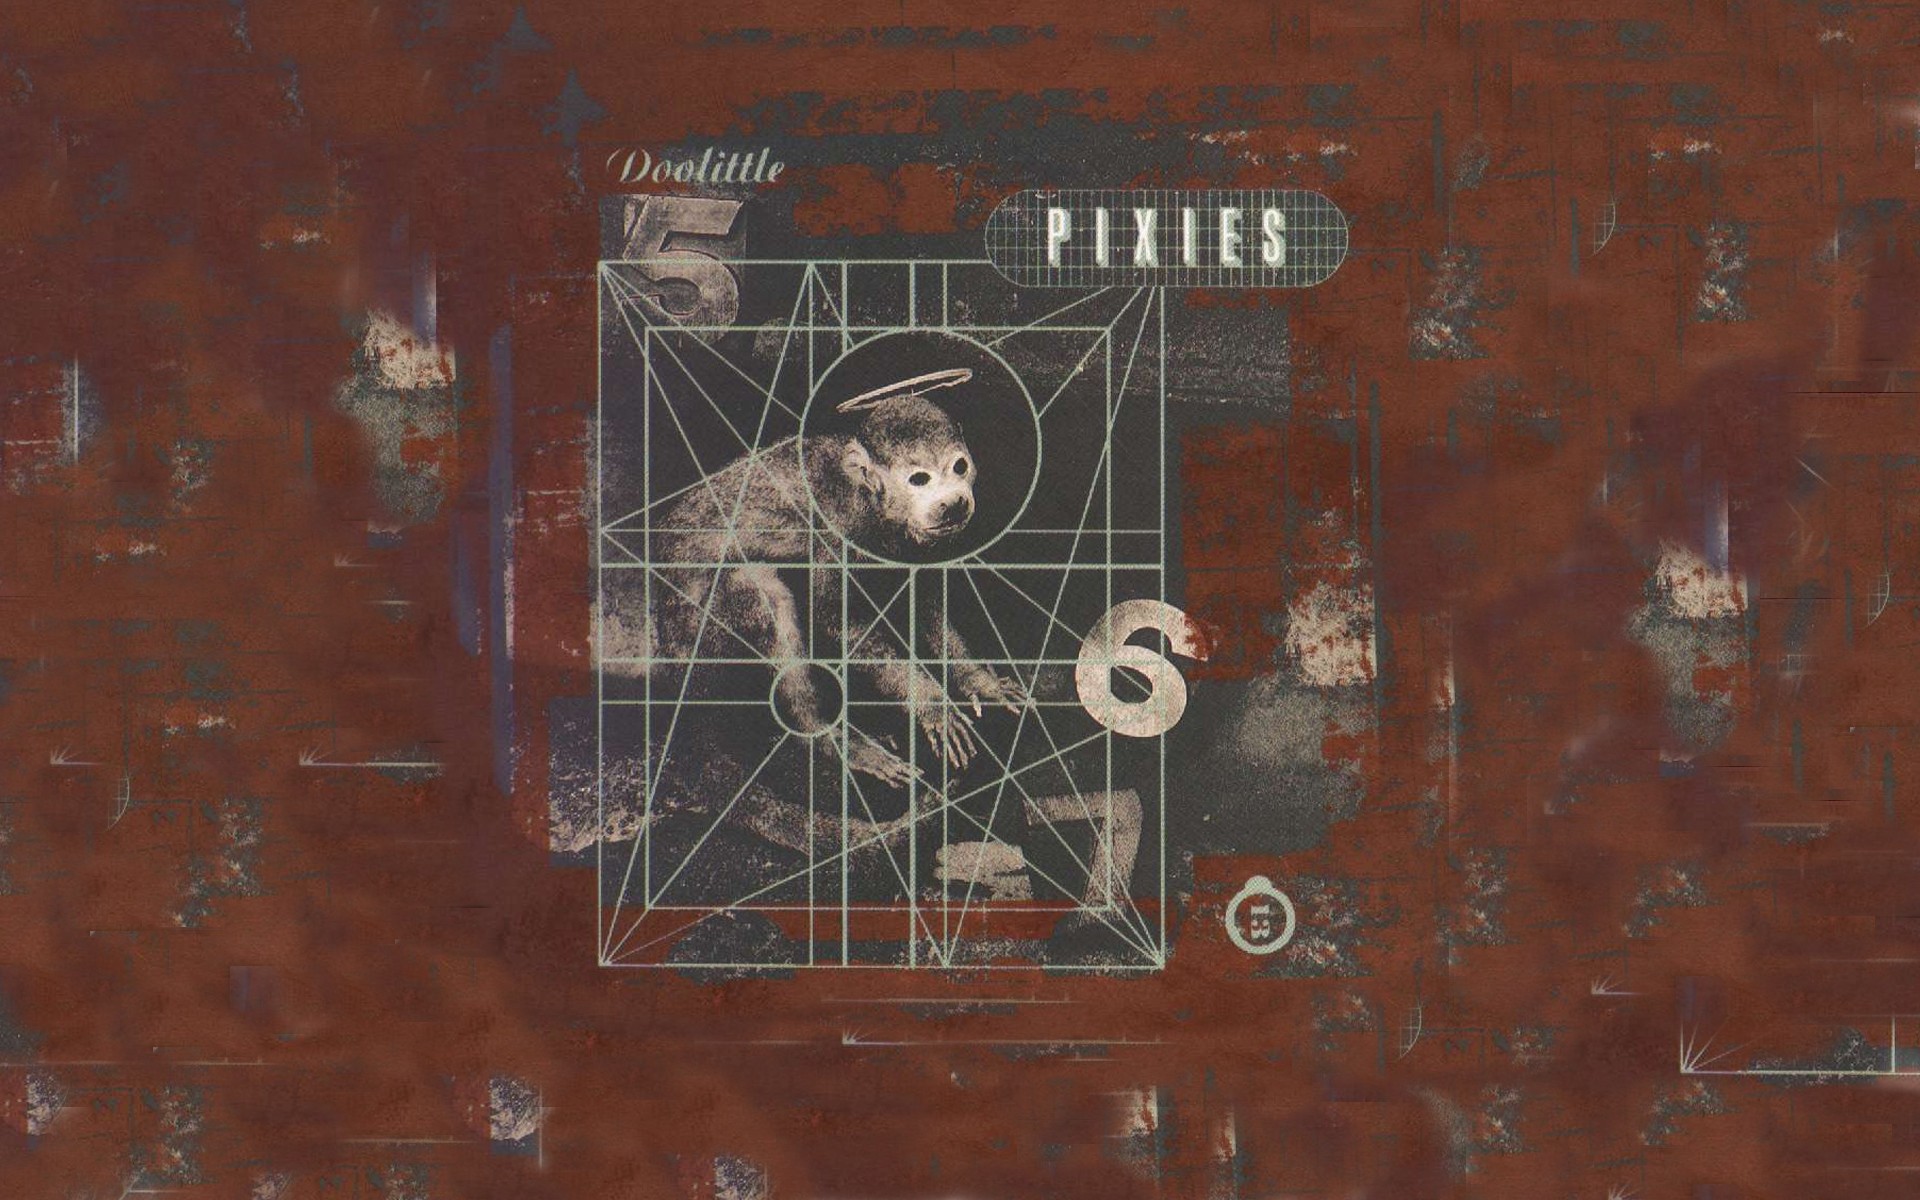 music, Pixies, Album covers Wallpaper HD / Desktop and Mobile Background